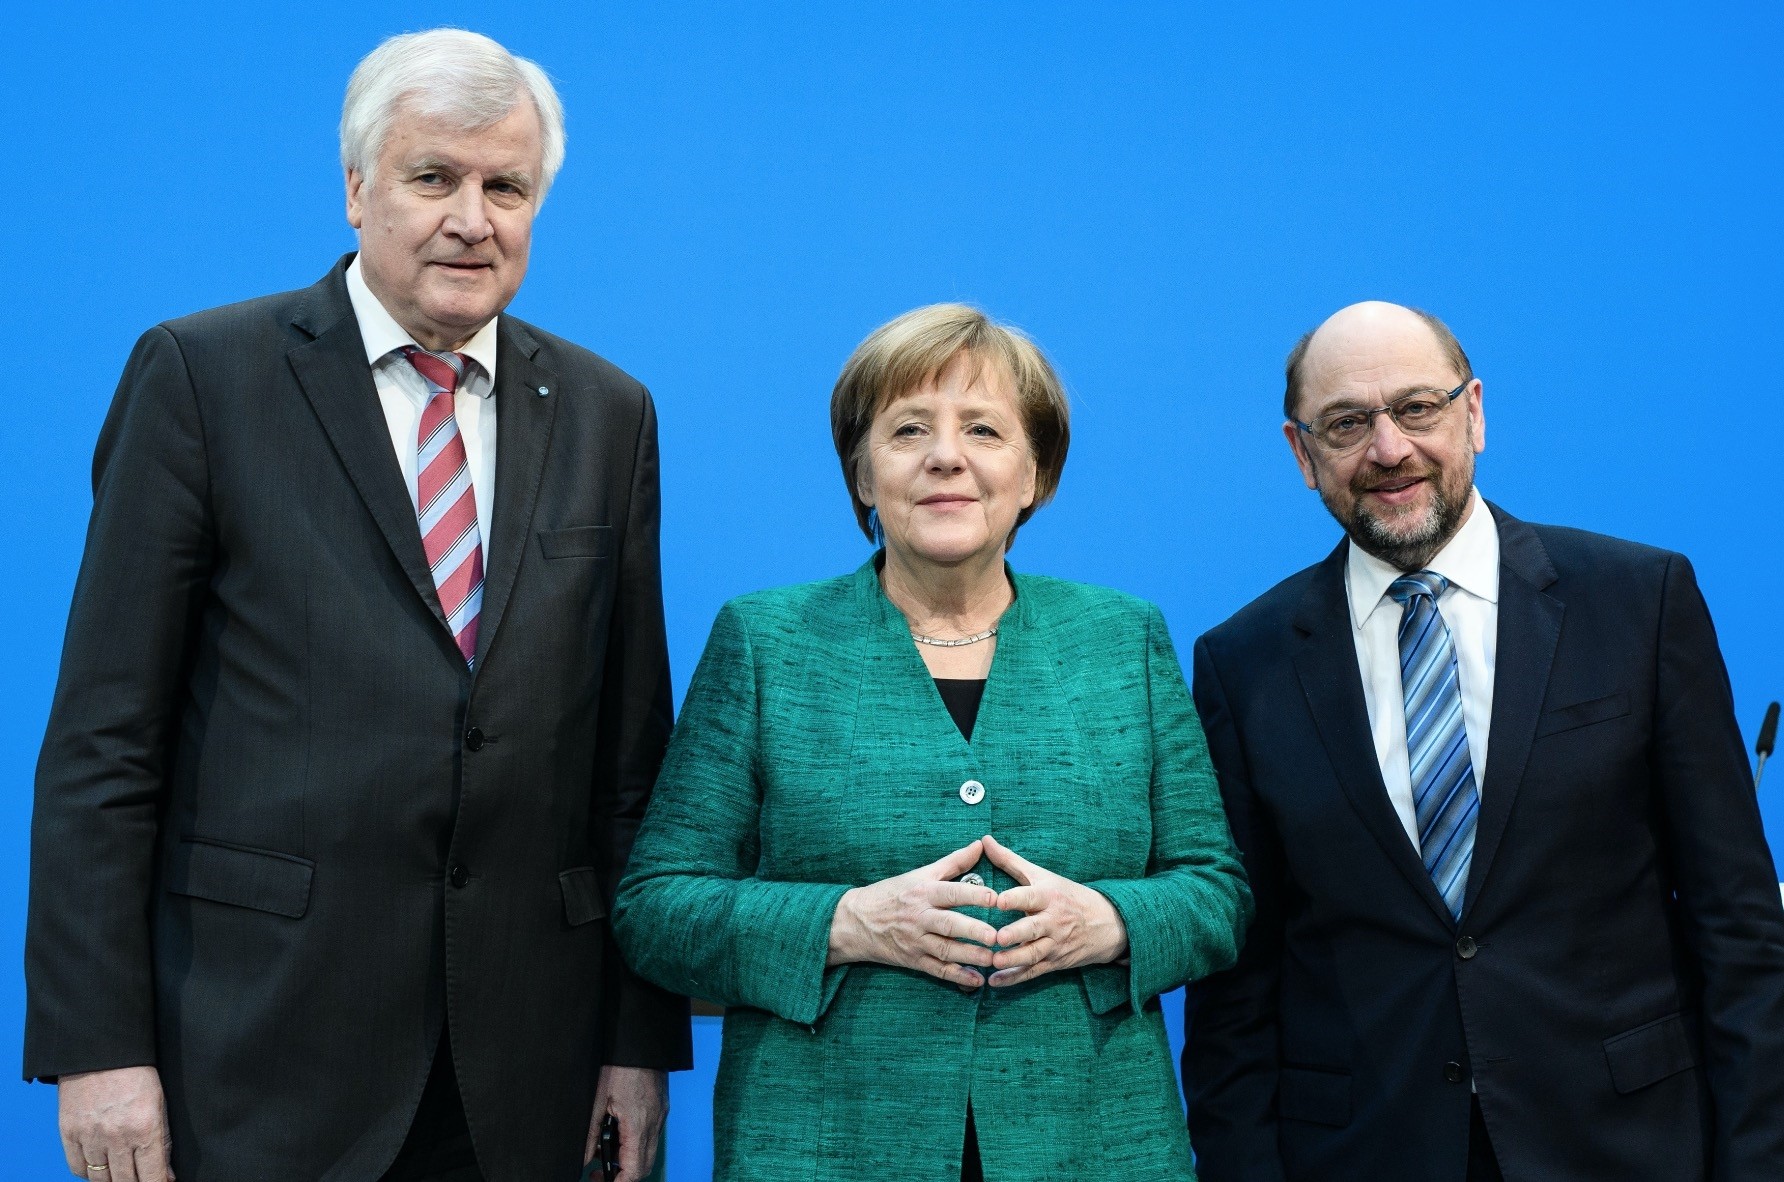 (From left to right) CSU leader Seehofer,  CDU leader and Chancellor Merkel and SPD leader Schulz during a press statement following coalition talks, Berlin, Feb. 7. 